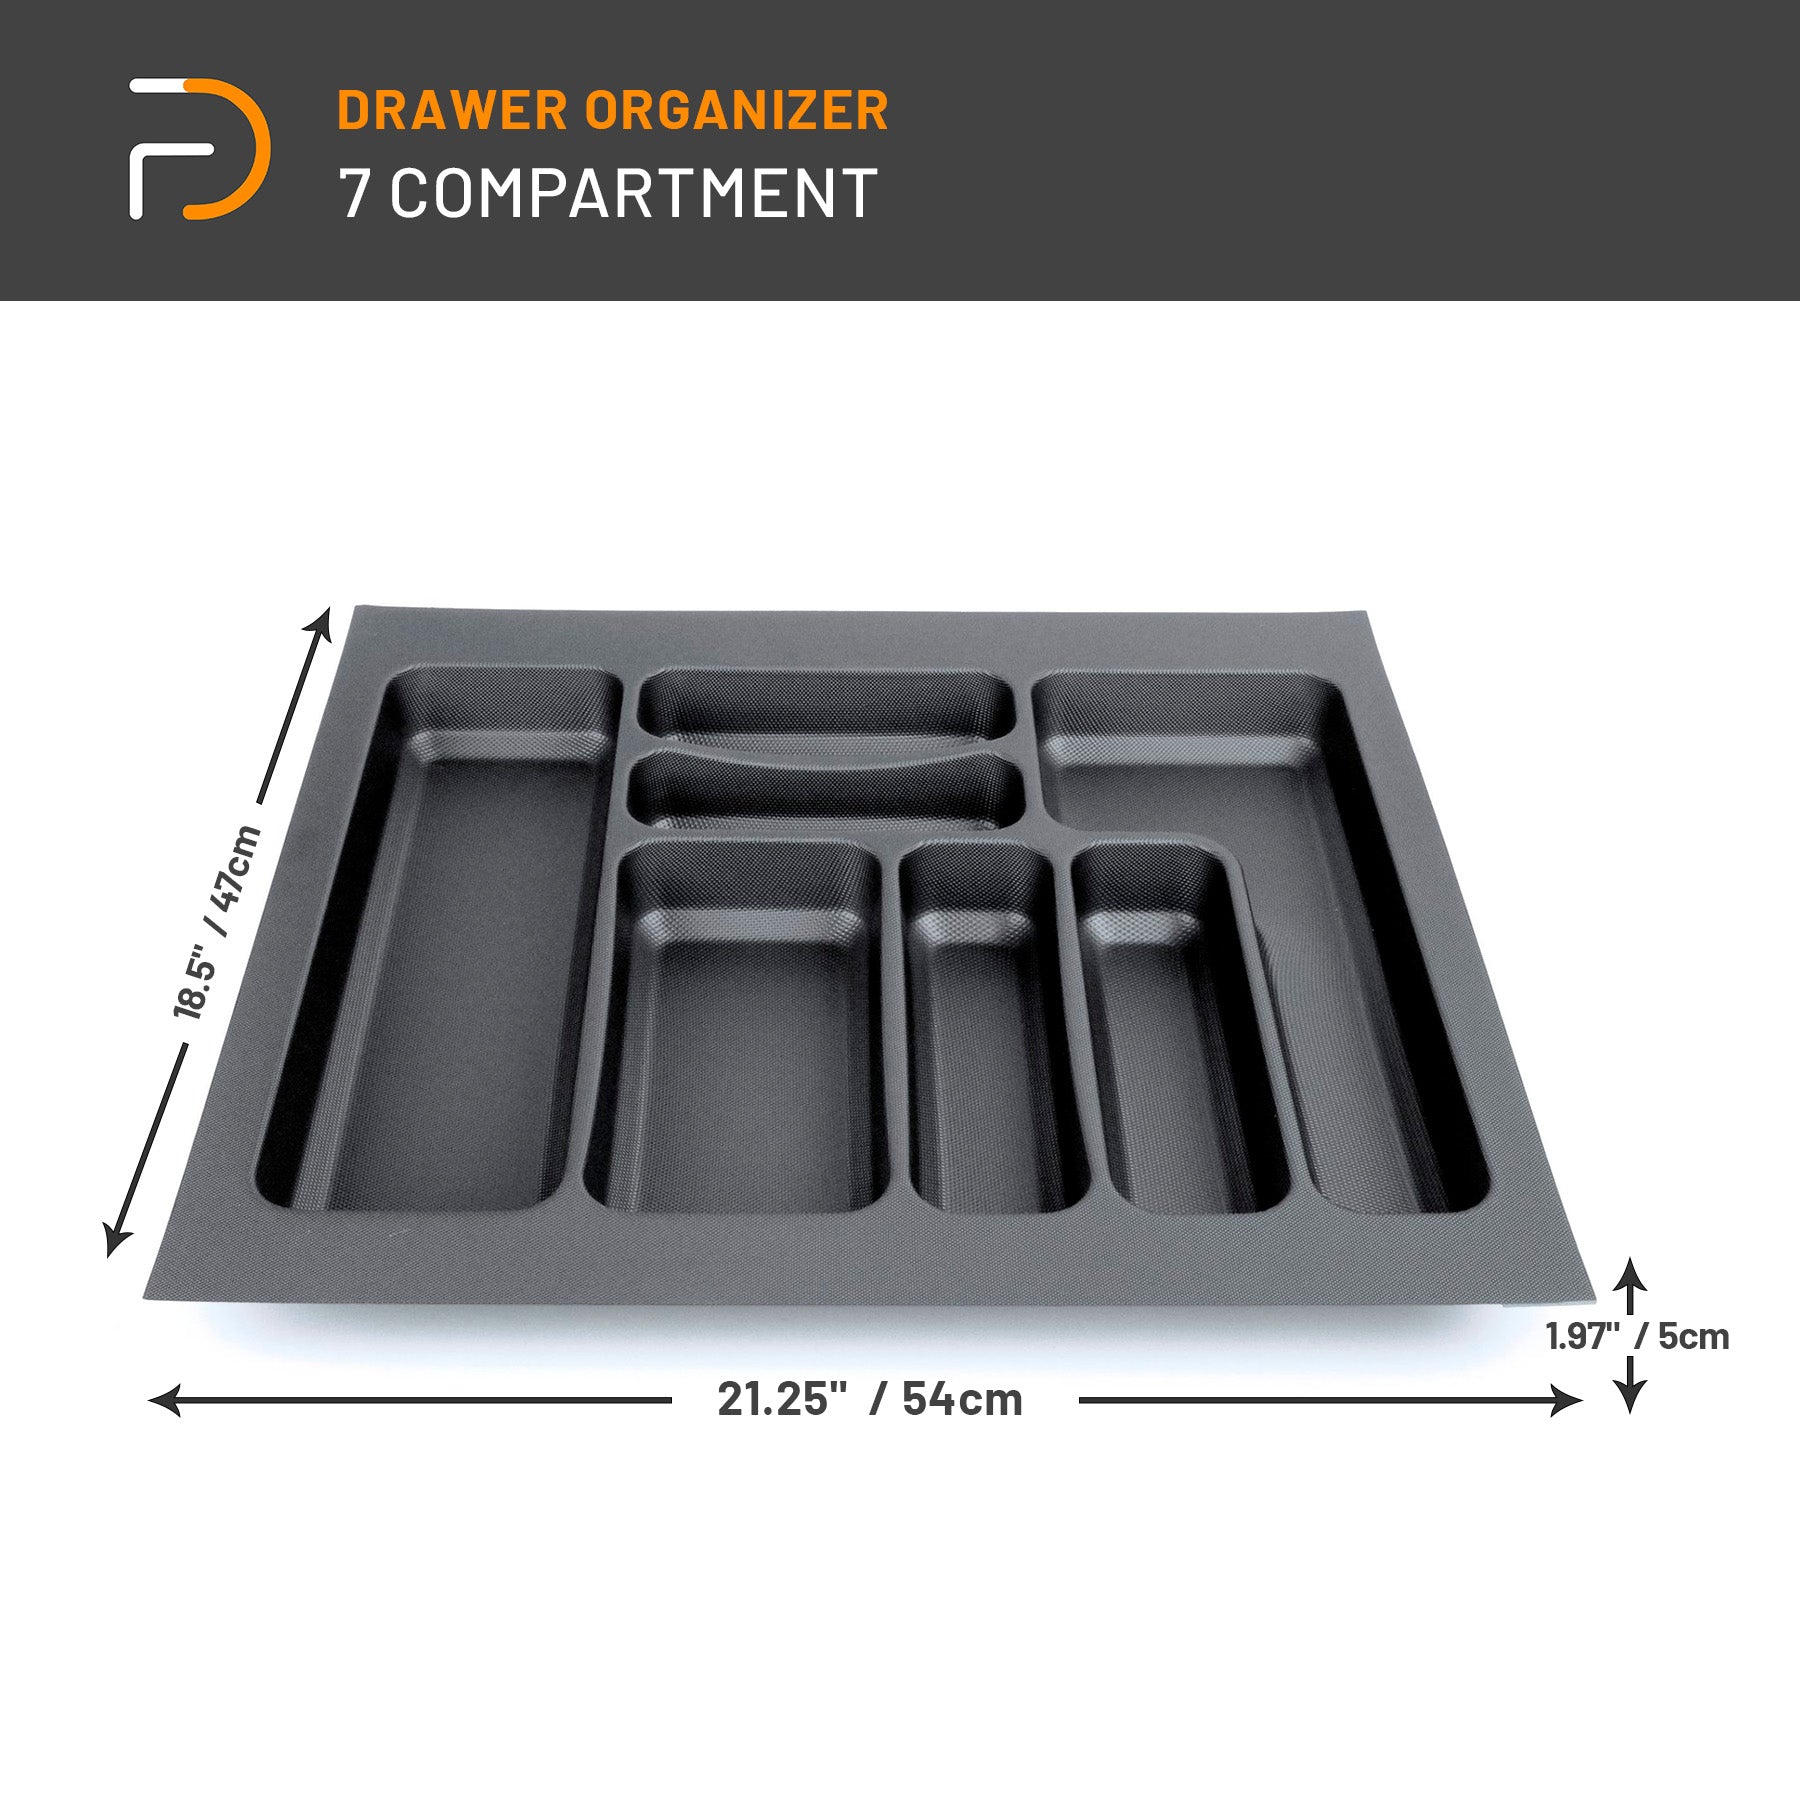 Furndiy Drawer Organizer Utensil Tray for Kitchen | Flatware and Cutlery Holder (6-7 Compartment)